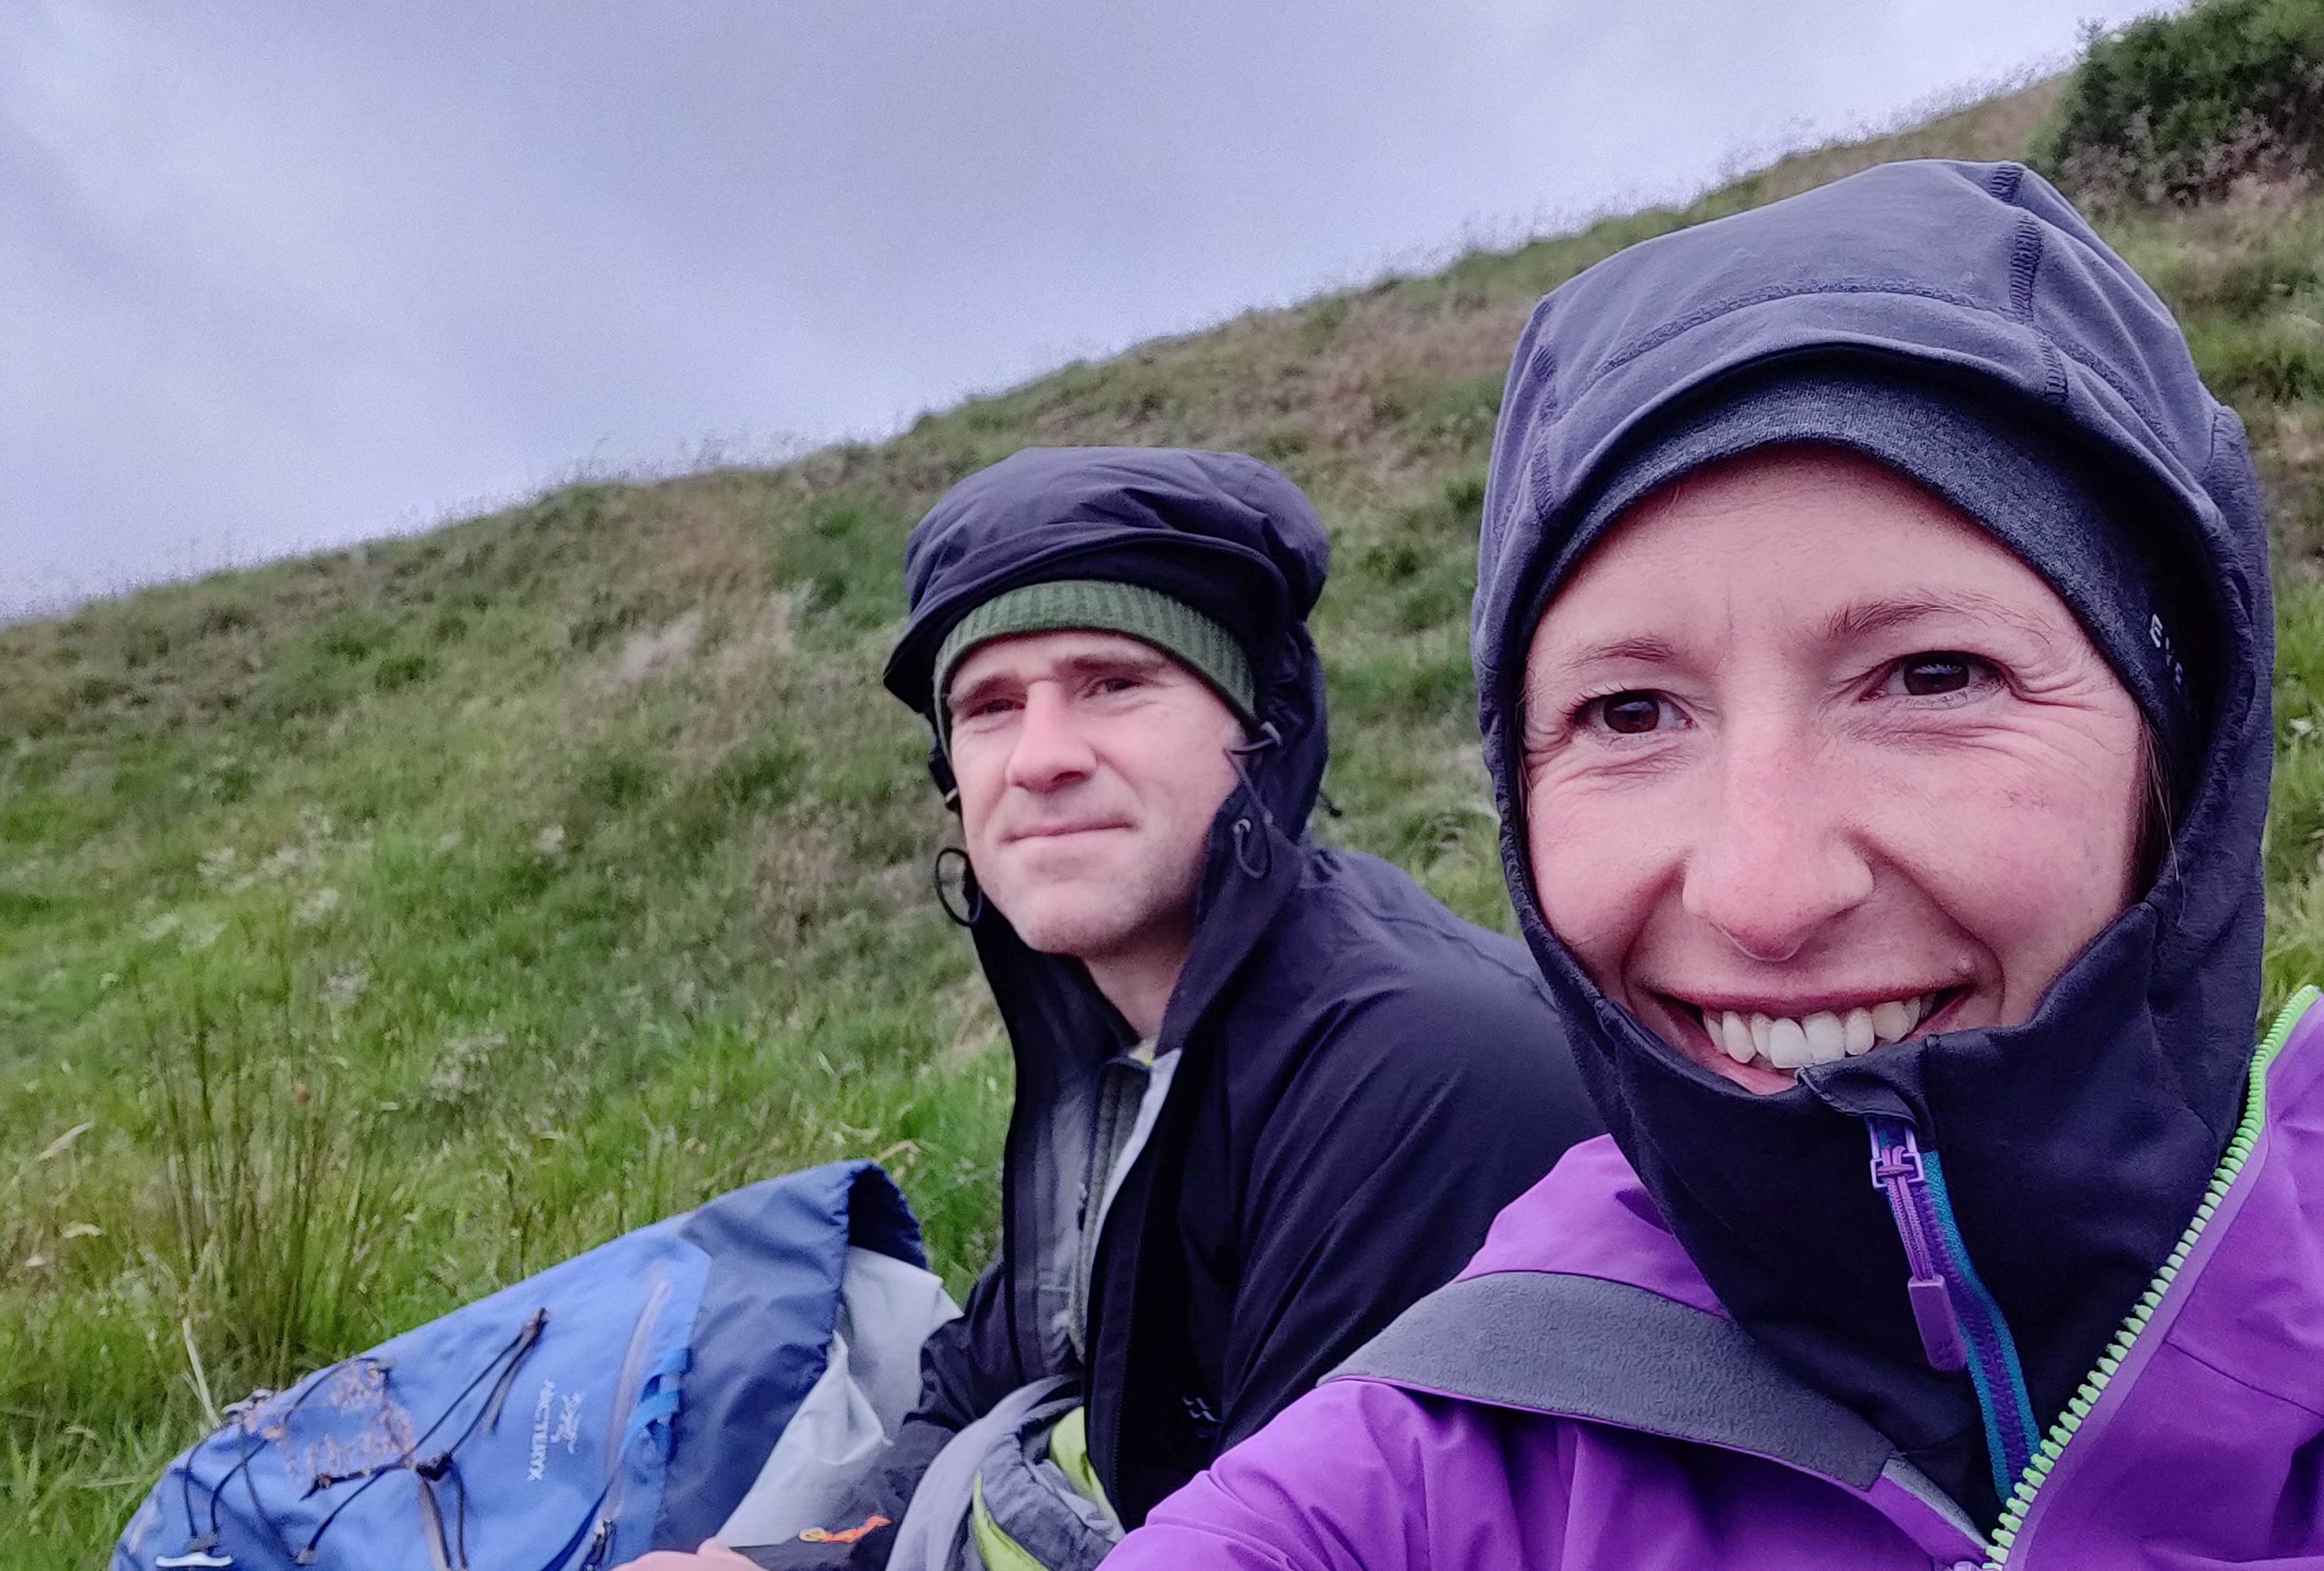 Gemma and Kial on Mam Tor, Peak District after a bivvy night